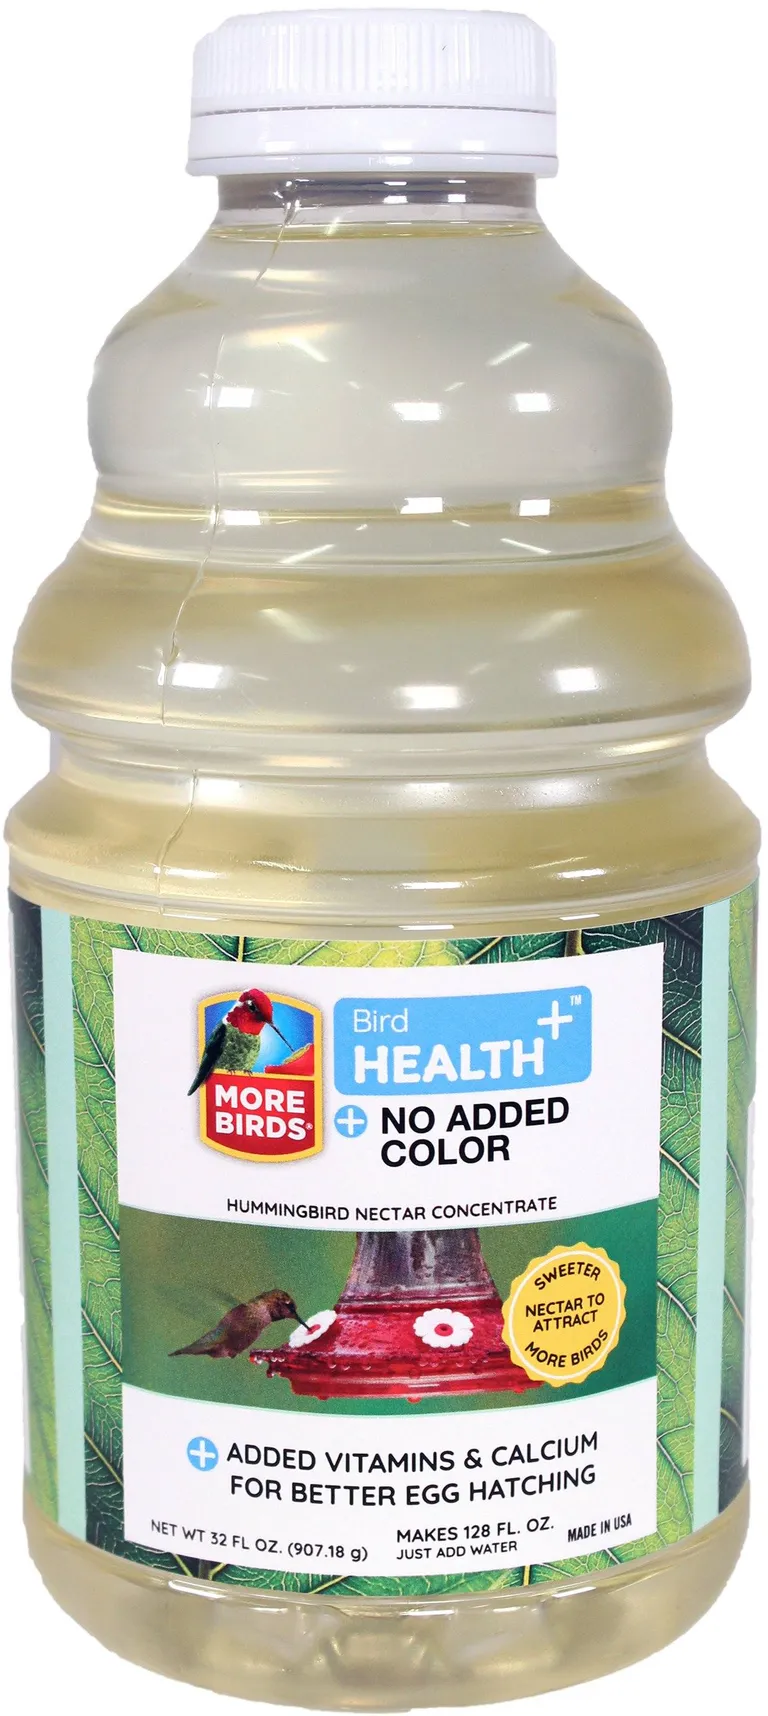 More Birds Health Plus Clear Hummingbird Nectar Concentrate Photo 1